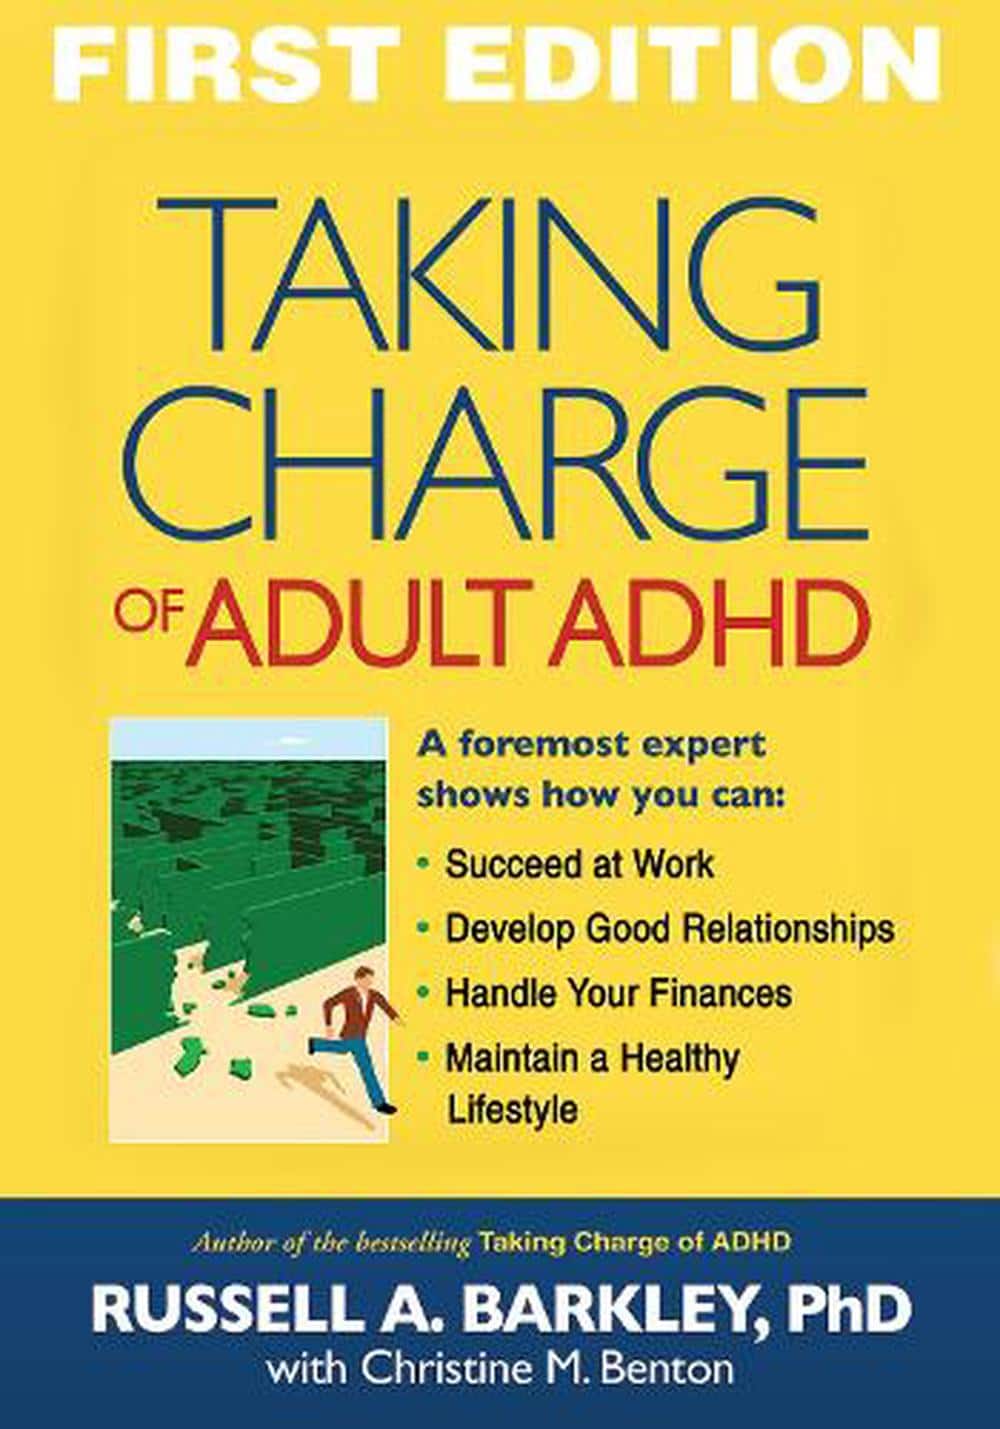 Taking Charge of Adult ADHD by Russell A. Barkley (English) Paperback ...